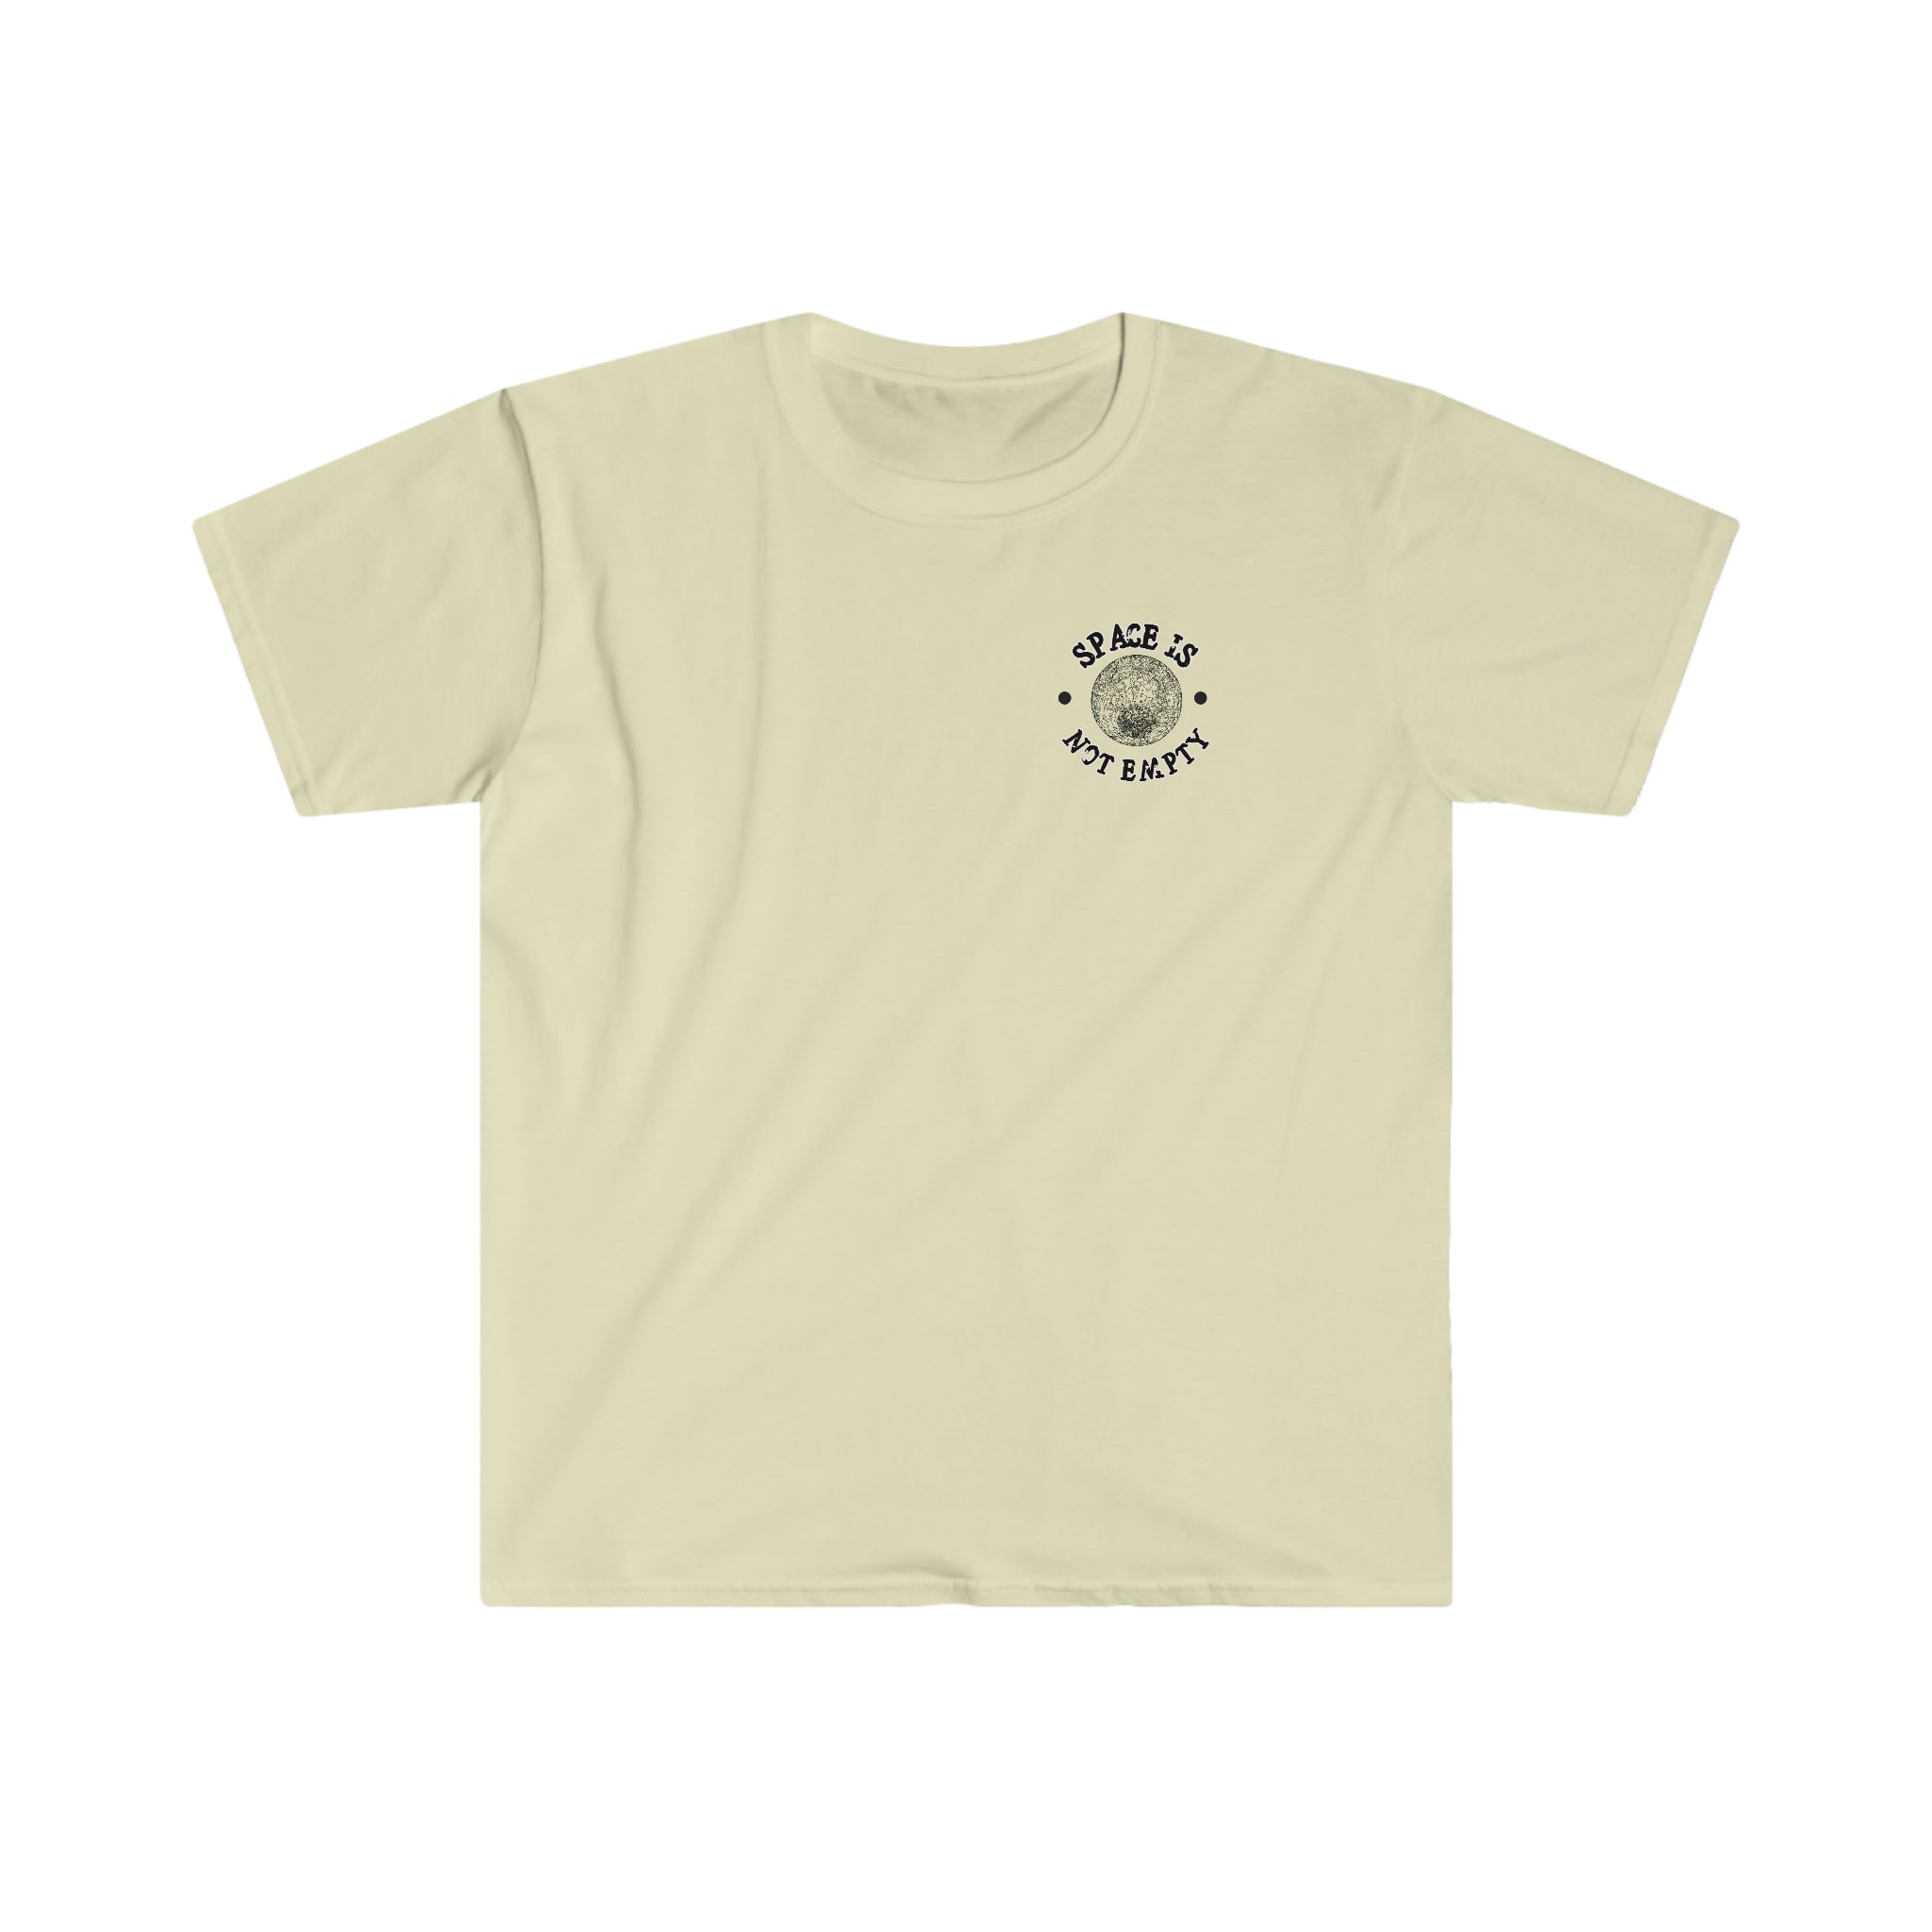 A black logo on a beige Space Station T-Shirt.